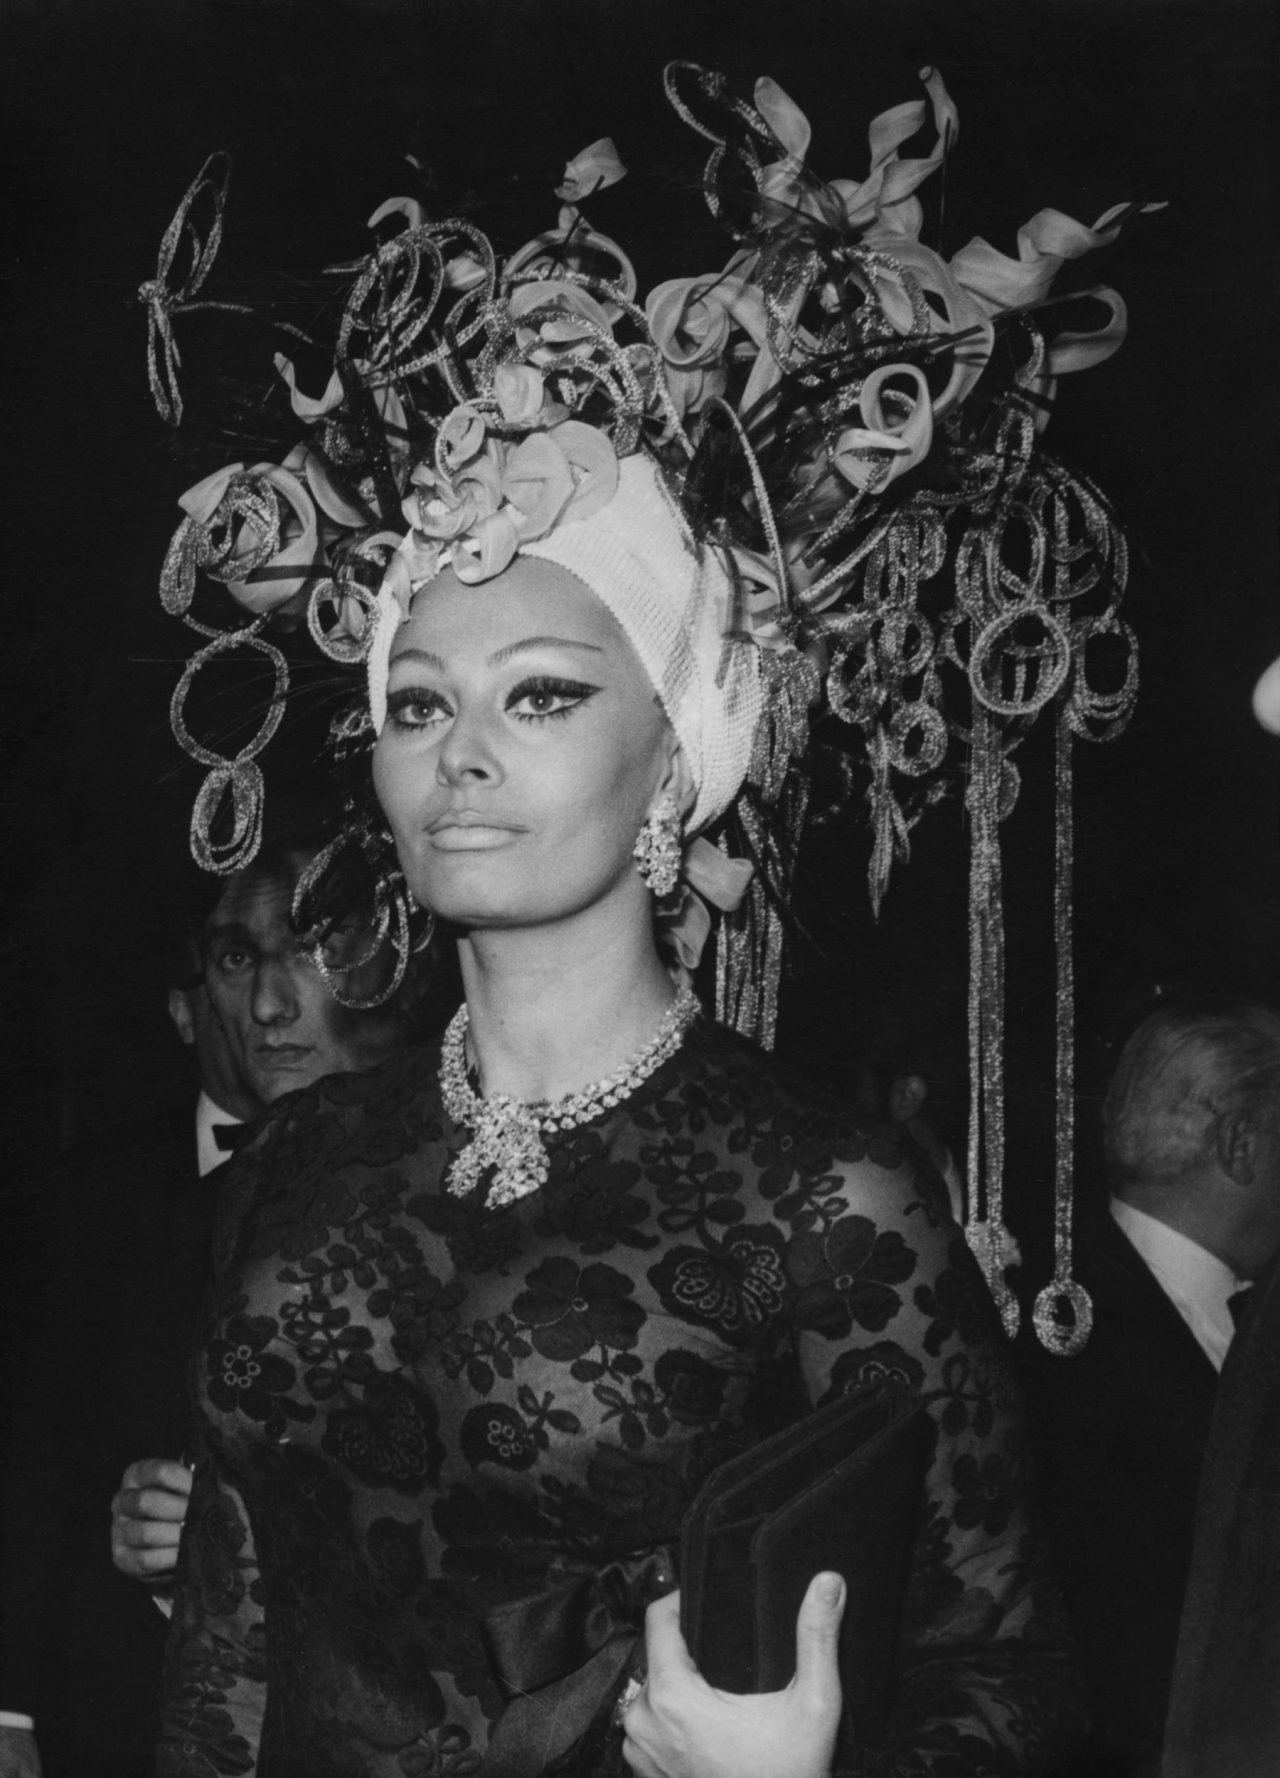 Sophia Loren arrives at a grand ball at the casino in